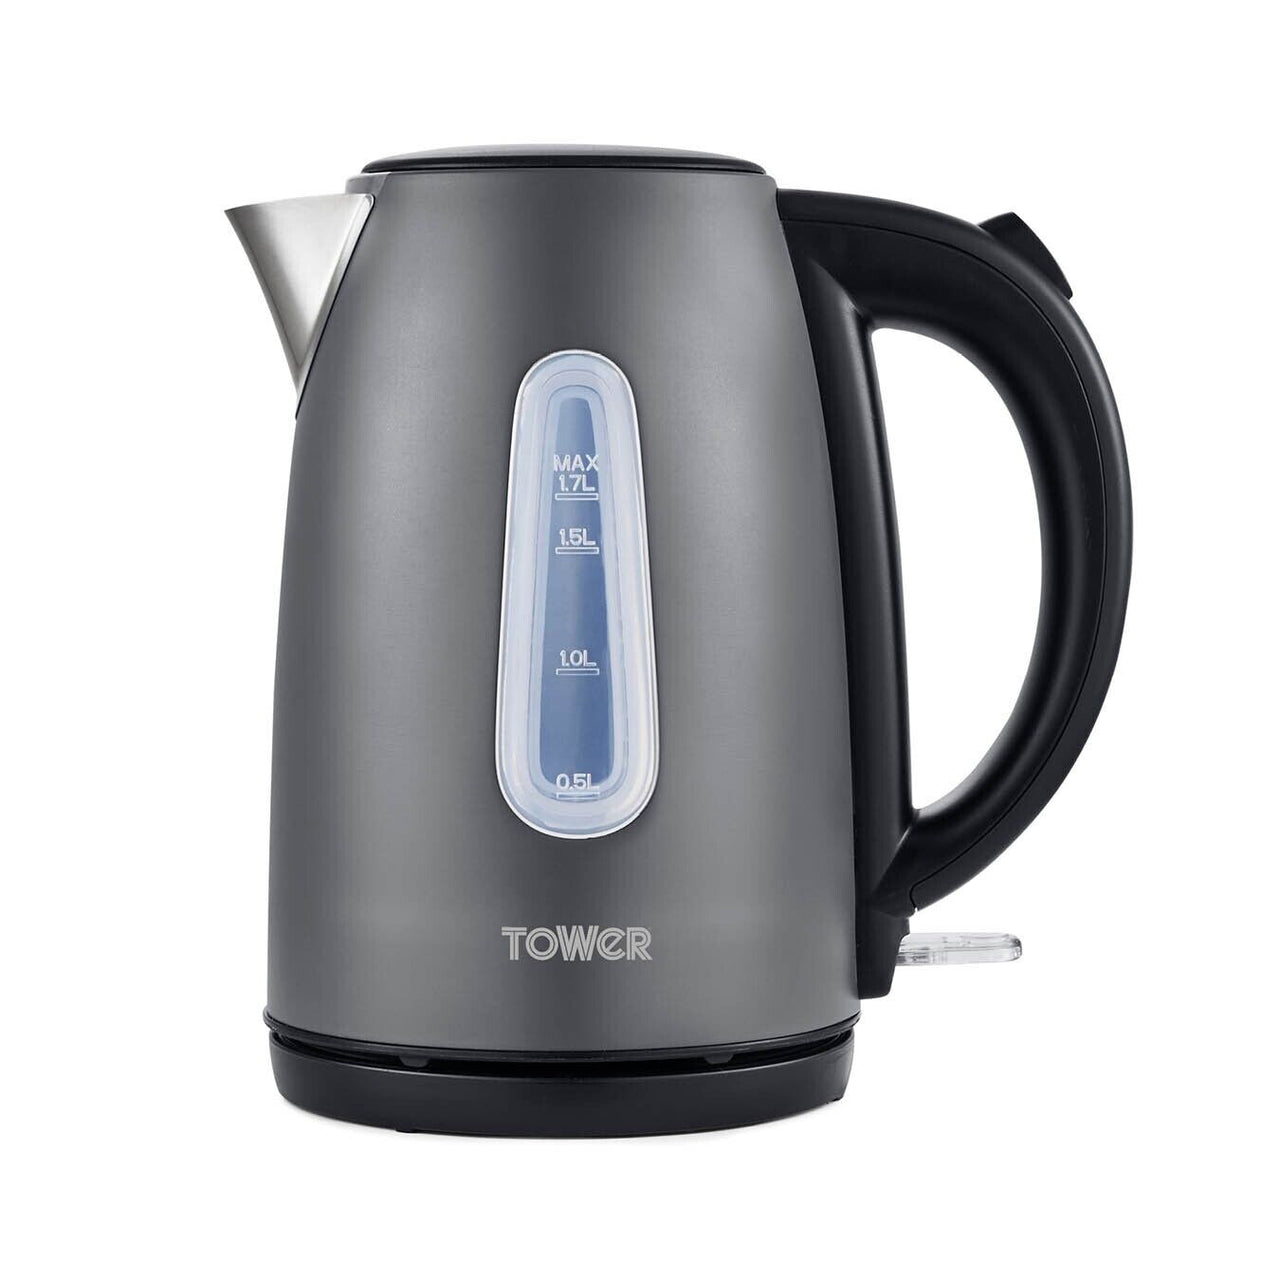 Tower Infinity Stone 3KW 1.7L Jug Kettle in Grey T10048SLT 3 Year Guarantee